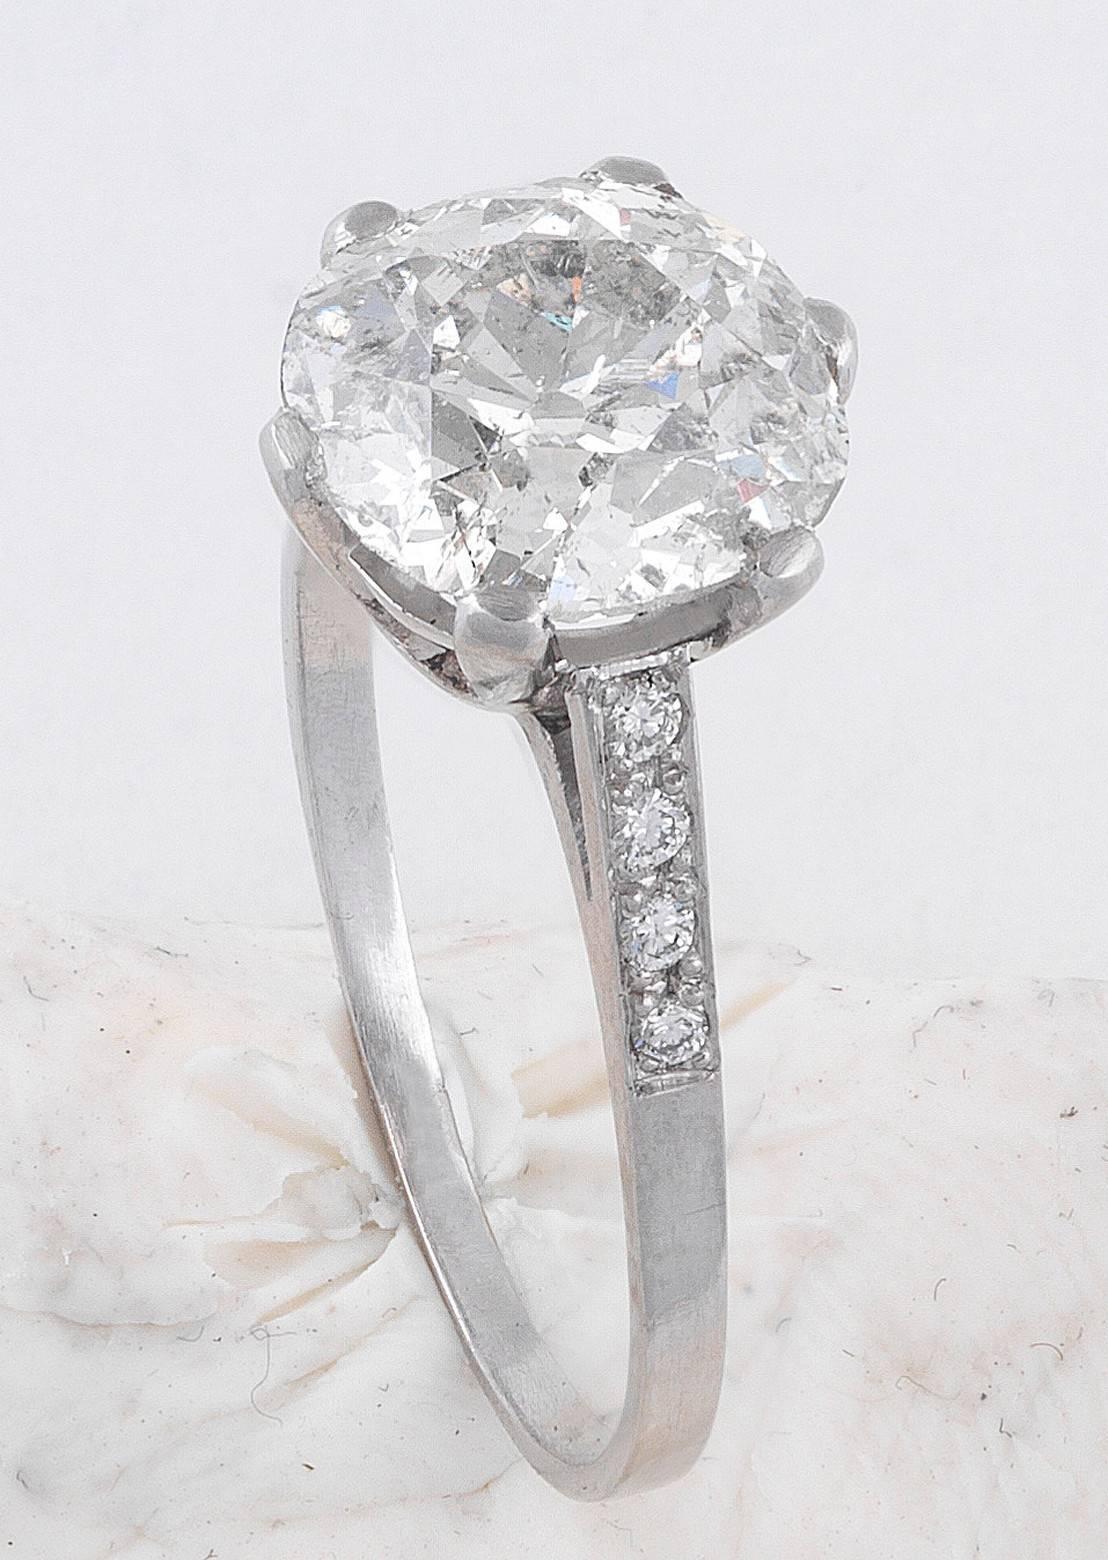 PLEASE NOTE: OUR PRICE IS FULLY INCLUSIVE OF SHIPPING, IMPORTATION TAXES & DUTIES.

c. 1905 England

An old cut cushion cut diamond ring weighing 3.08ct, I SI2. Mounted in platinum in a four split claw setting with cut diamond set